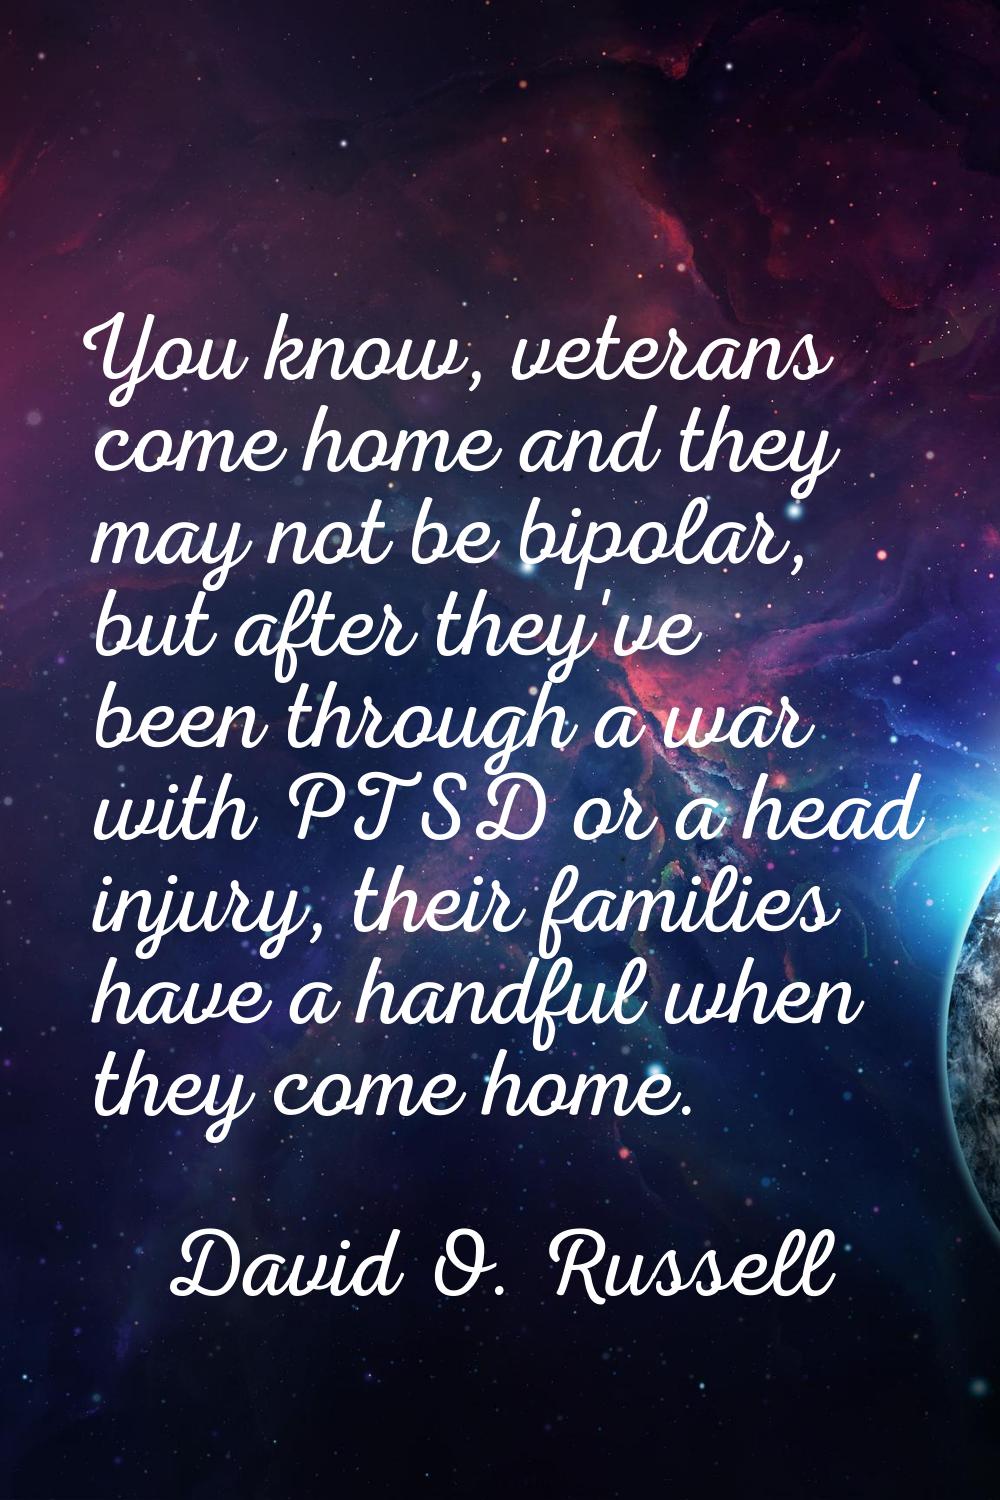 You know, veterans come home and they may not be bipolar, but after they've been through a war with